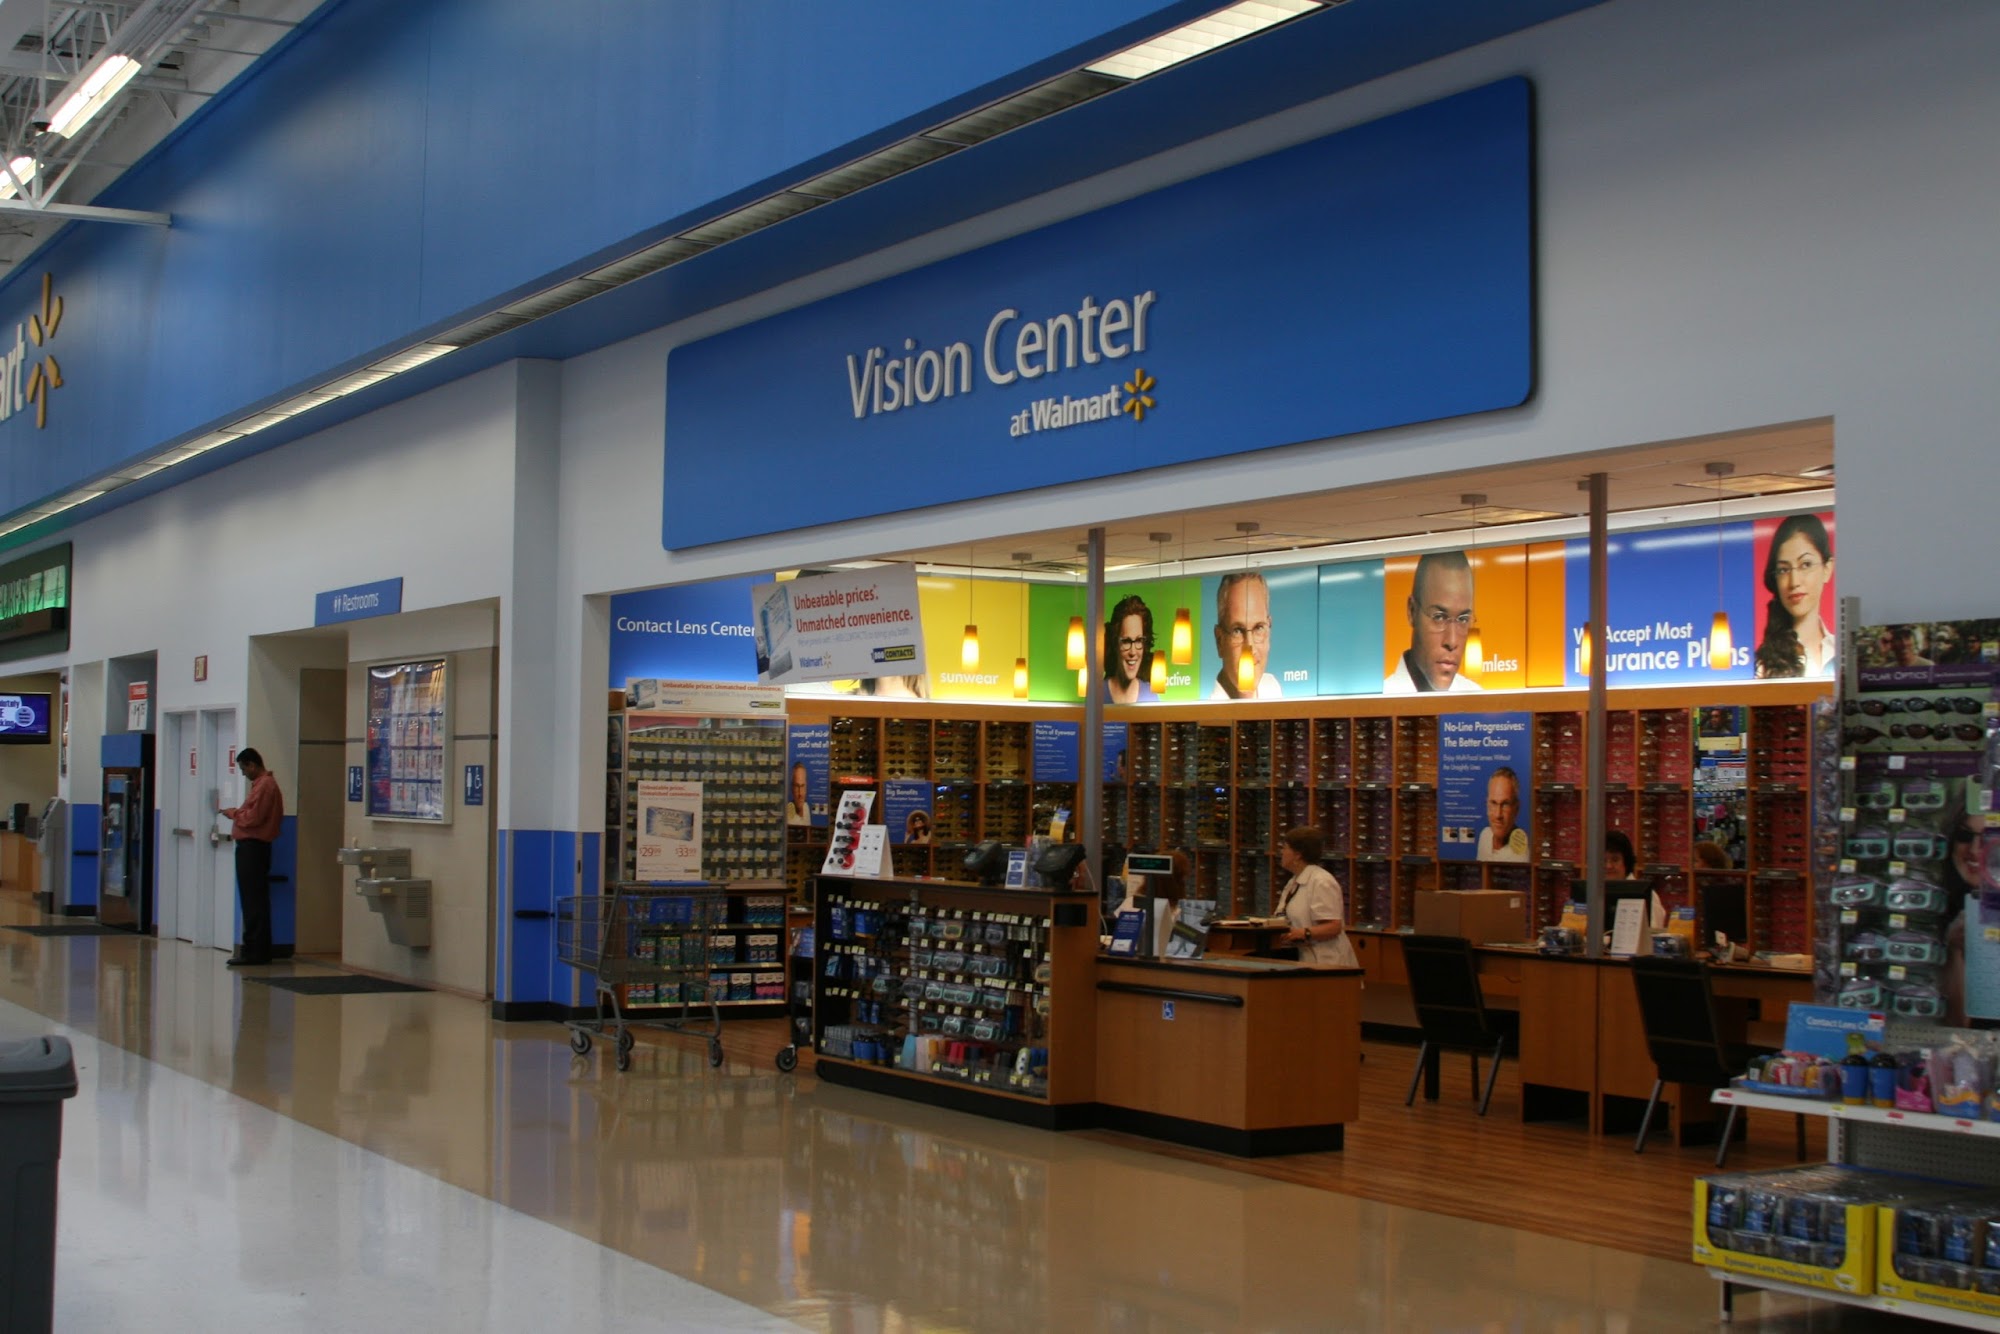 Walmart Vision & Glasses 4525 Hwy 411, Madisonville Tennessee 37354